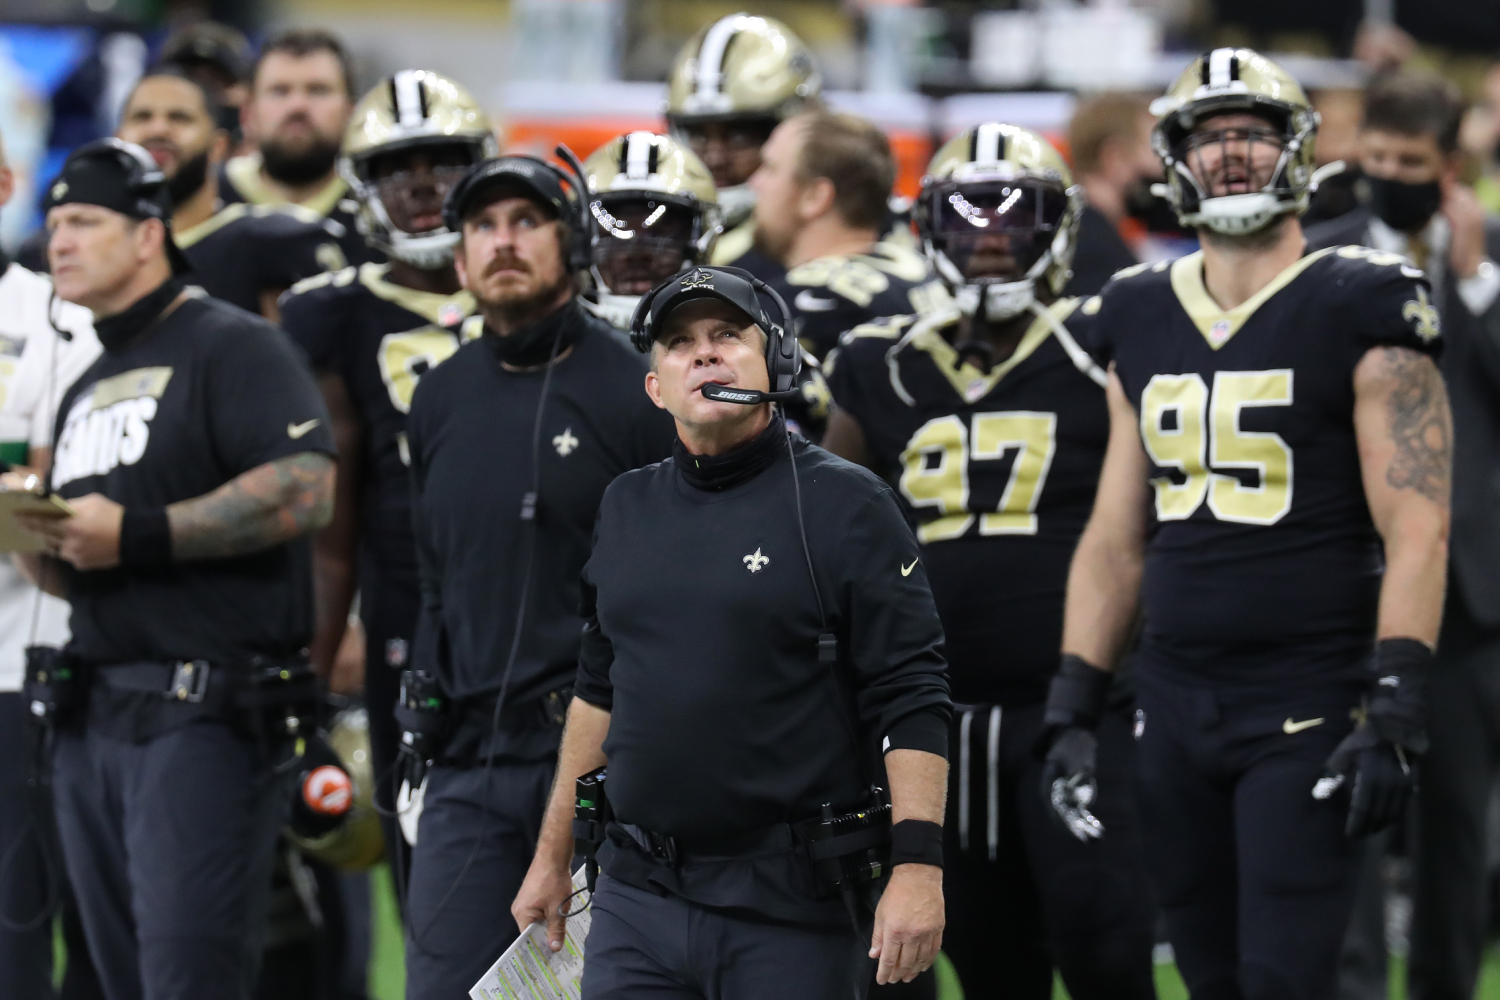 The New Orleans Saints have been one of the best teams in the NFL the past few years. Could they soon move on from their best player?